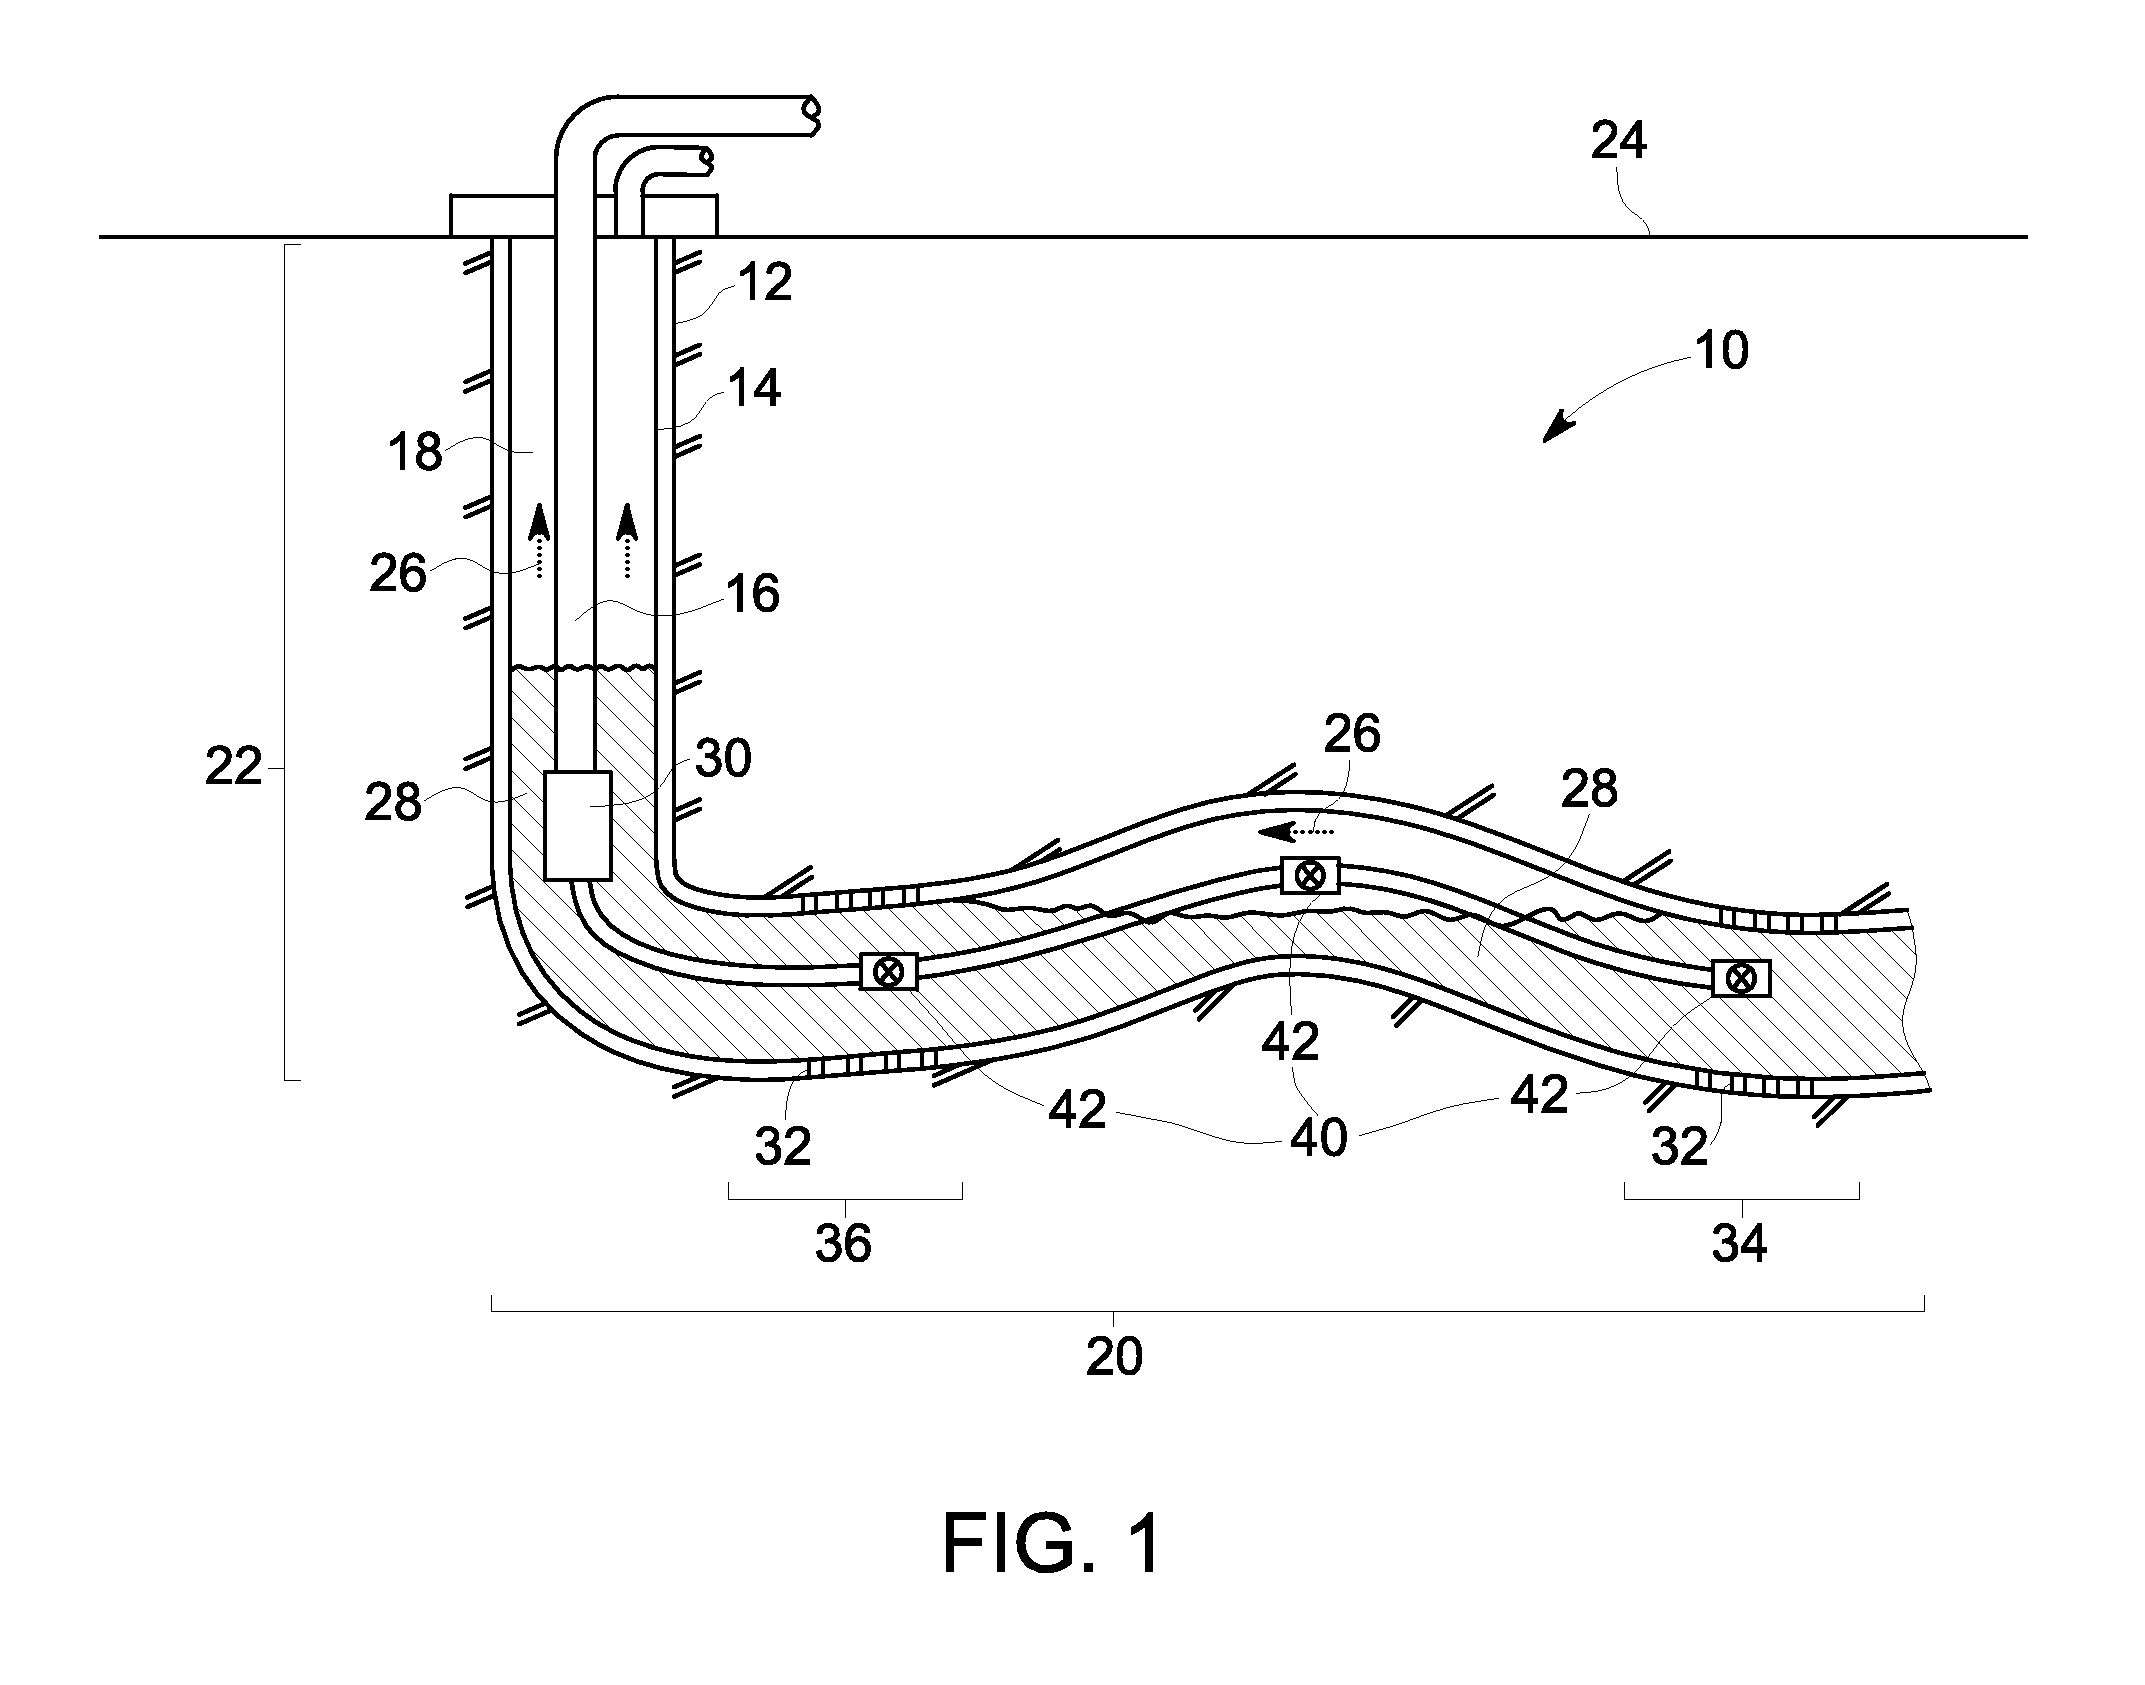 System and method for controlling flow in a well production system